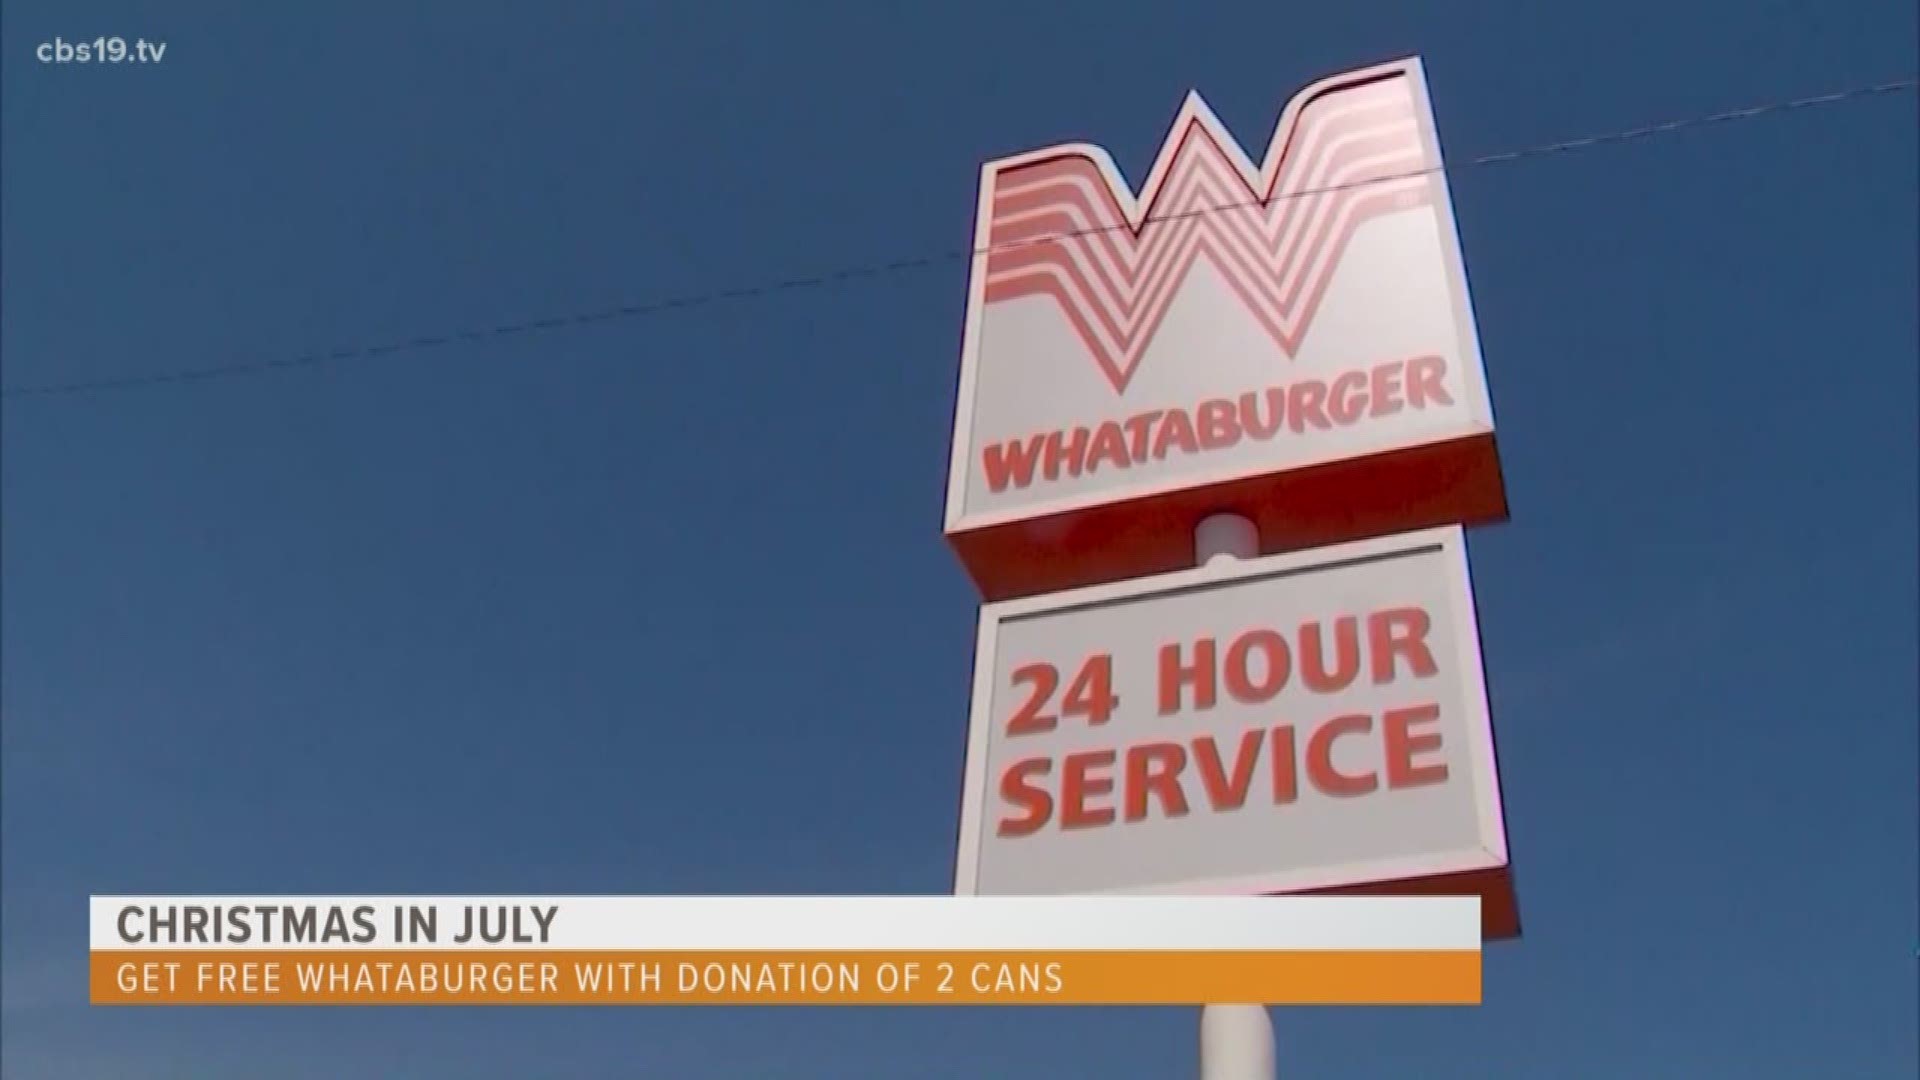 Tuesday only East Texans will receive a free Whataburger by donating a minimum of two cans or non-perishable food items. Donations must be made inside Whataburger.